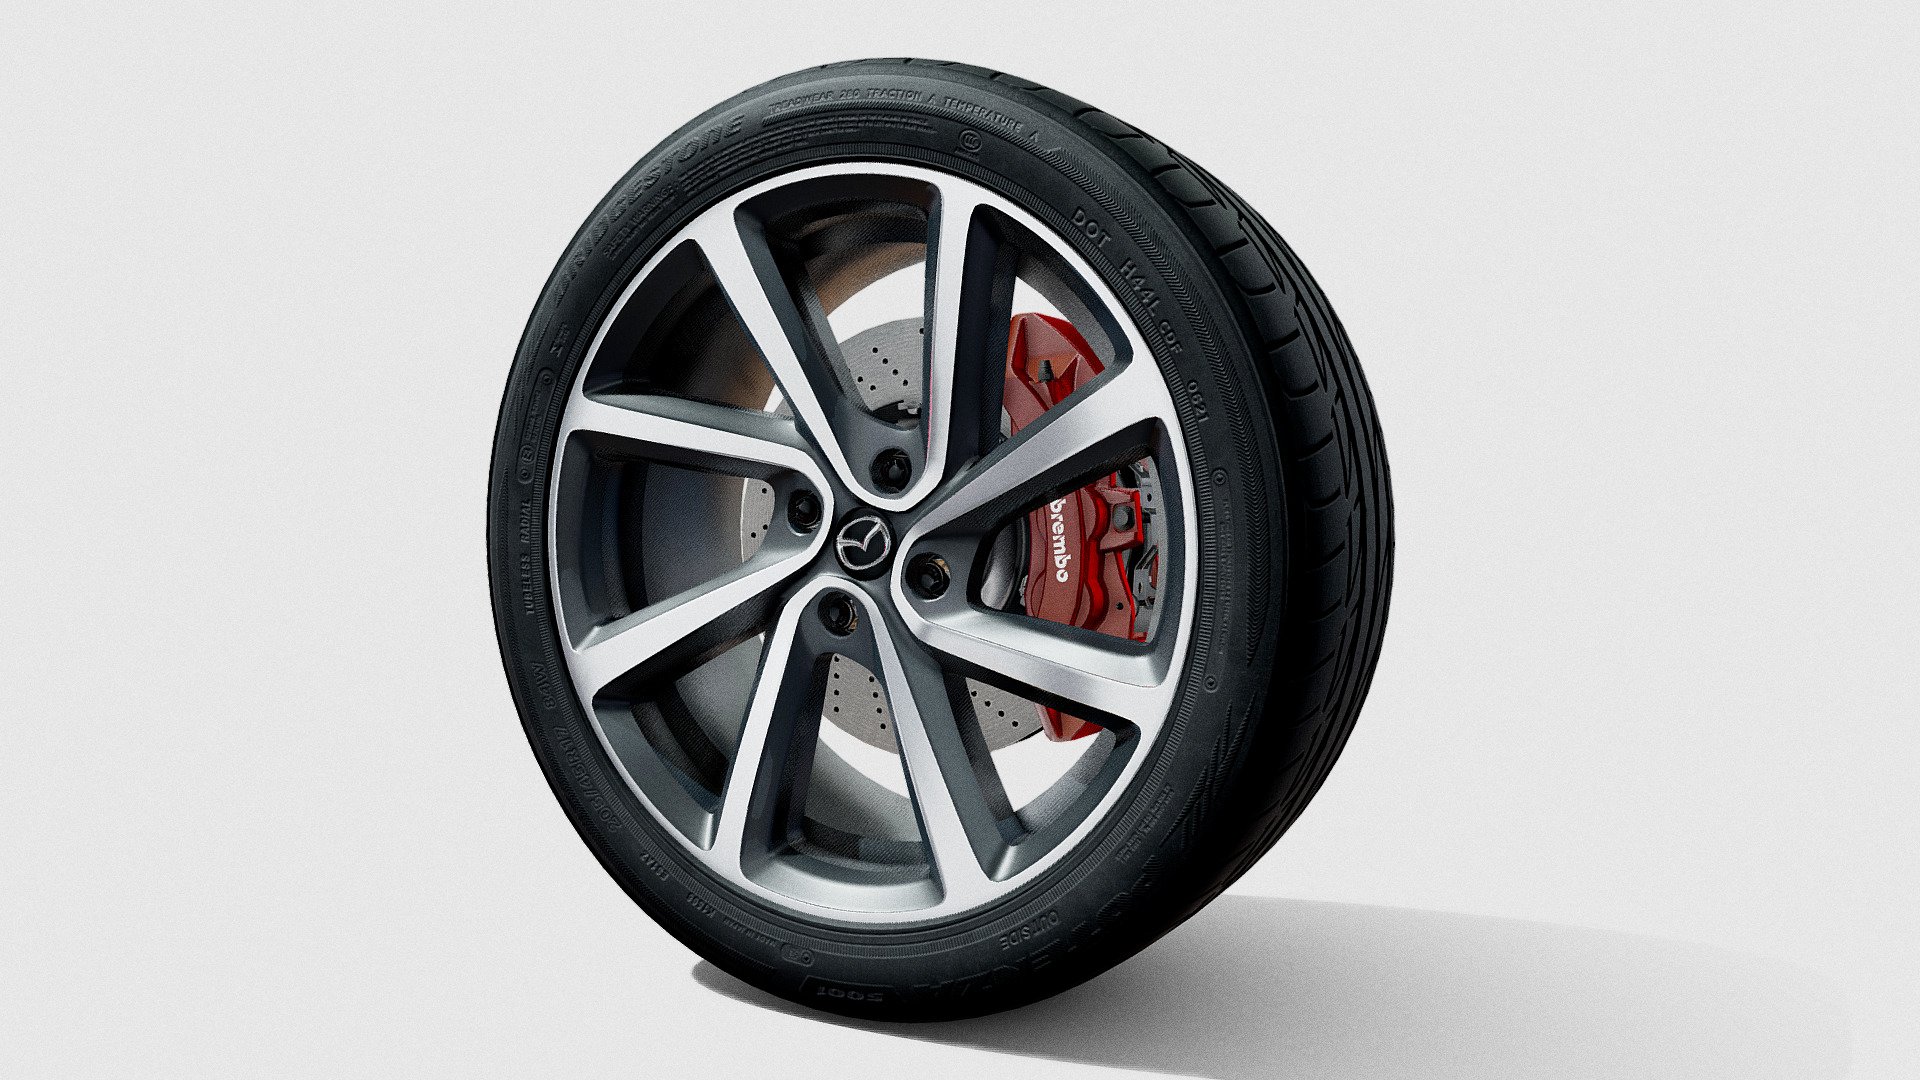 Mazda Miata alloy Wheel Design 66

Modeled in Lightwave 2015 with the help of Marmoset Toolbag 4 for texturing and Photoshop 3d model